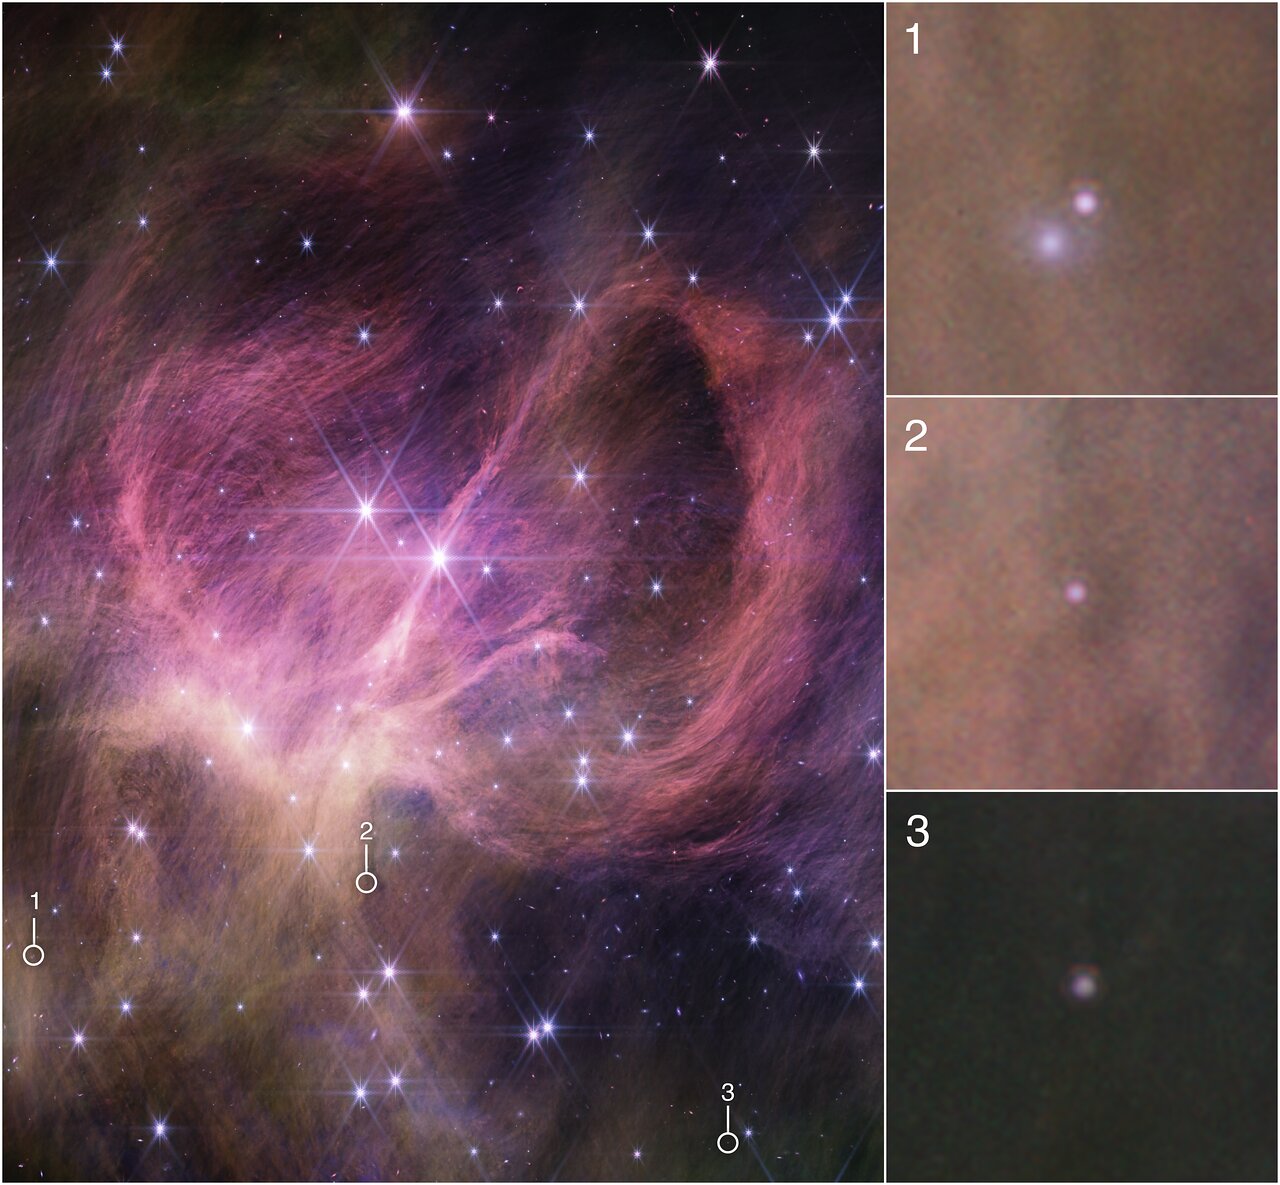 Image of a star cluster and nebula, with three image details pulled out in square boxes stacked vertically along the right. Main image is showing wispy pink-purple filaments and a scattering of stars. Each of the three boxes along the right corresponds to a small detail, numbered and circled, in the main image. Box 1 (top): A detail from the lower left of the main image shows a pair of small circular pinkish-white spots on a yellowish-brown background. Box 2 (middle): A detail from the middle of the lower part of the main image shows a single small circular pinkish spot on a yellowish-brown background. Box 3: A detail from the lower right edge of the main image shows a small circular pinkish spot on a dark brown background